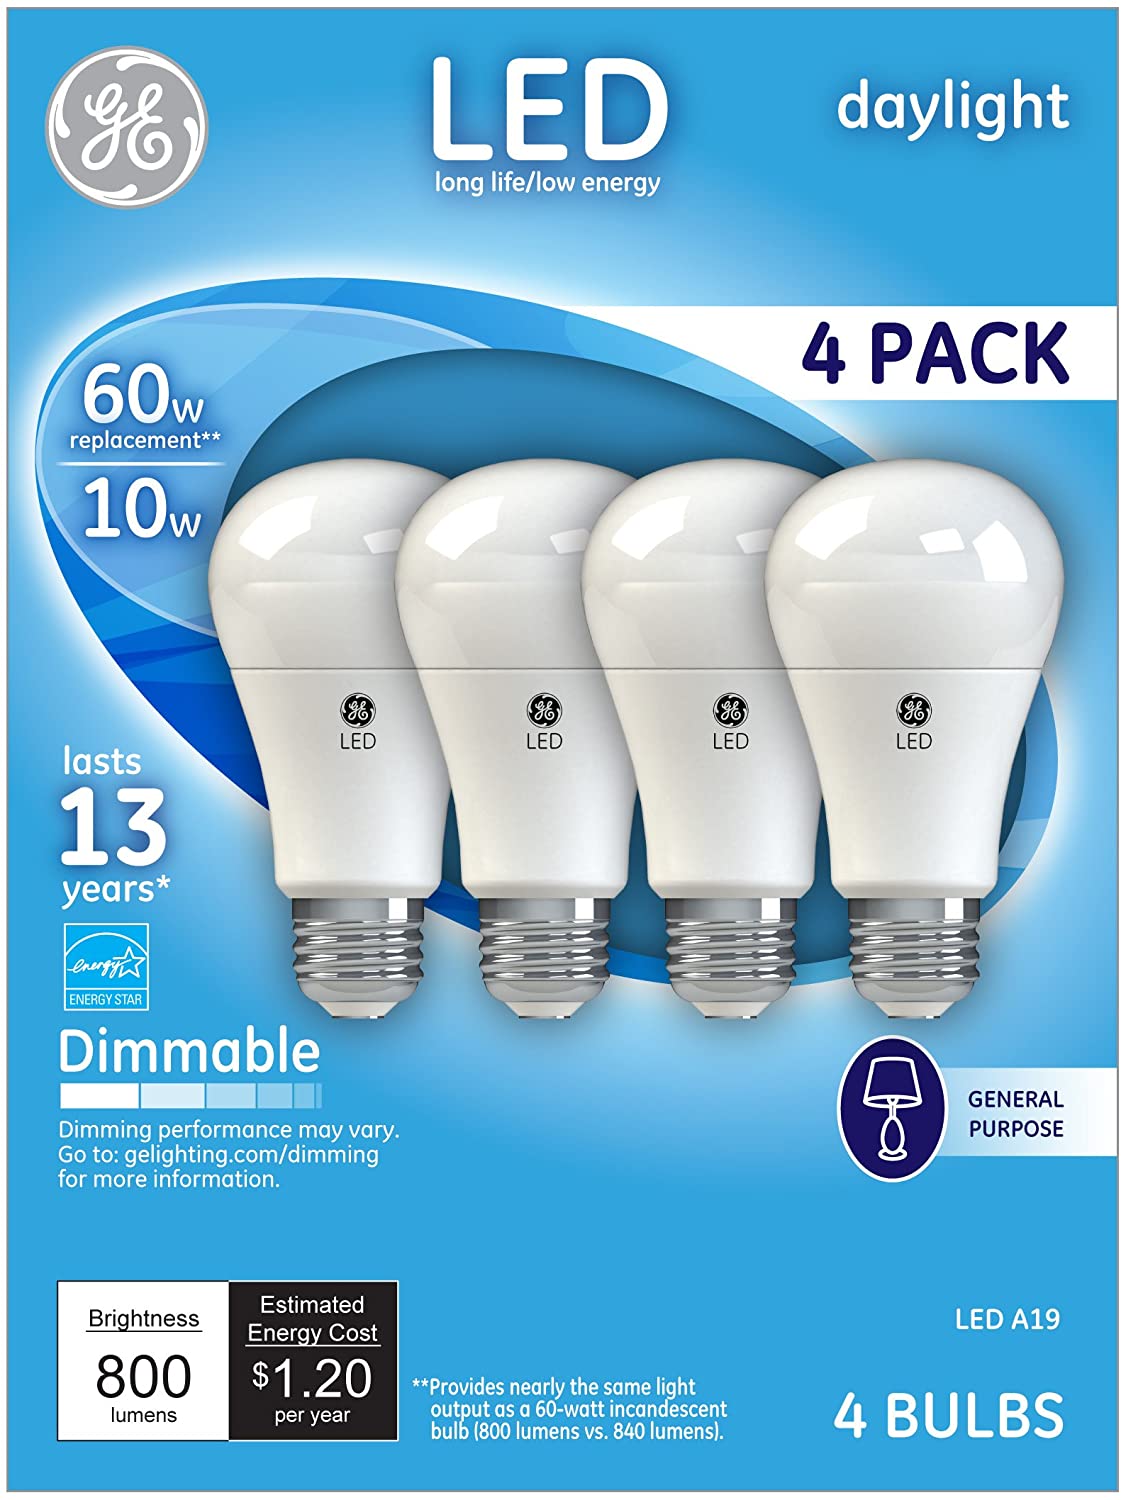 GE Daylight LED 60W Replacement General Purpose A19 Light Bulb, 4 Pack